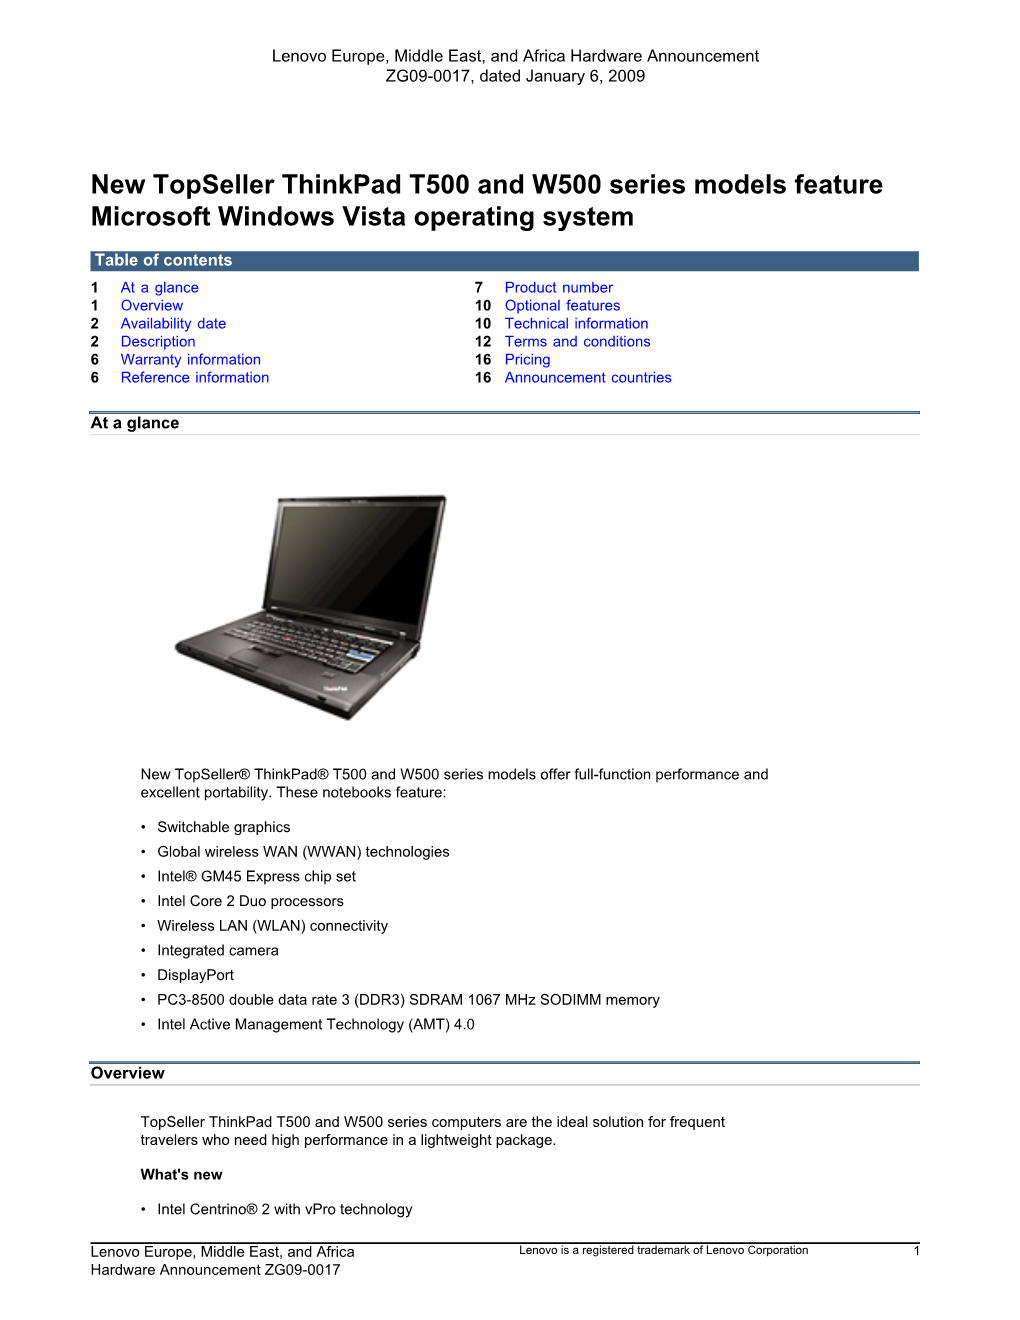 New Topseller Thinkpad T500 and W500 Series Models Feature Microsoft Windows Vista Operating System